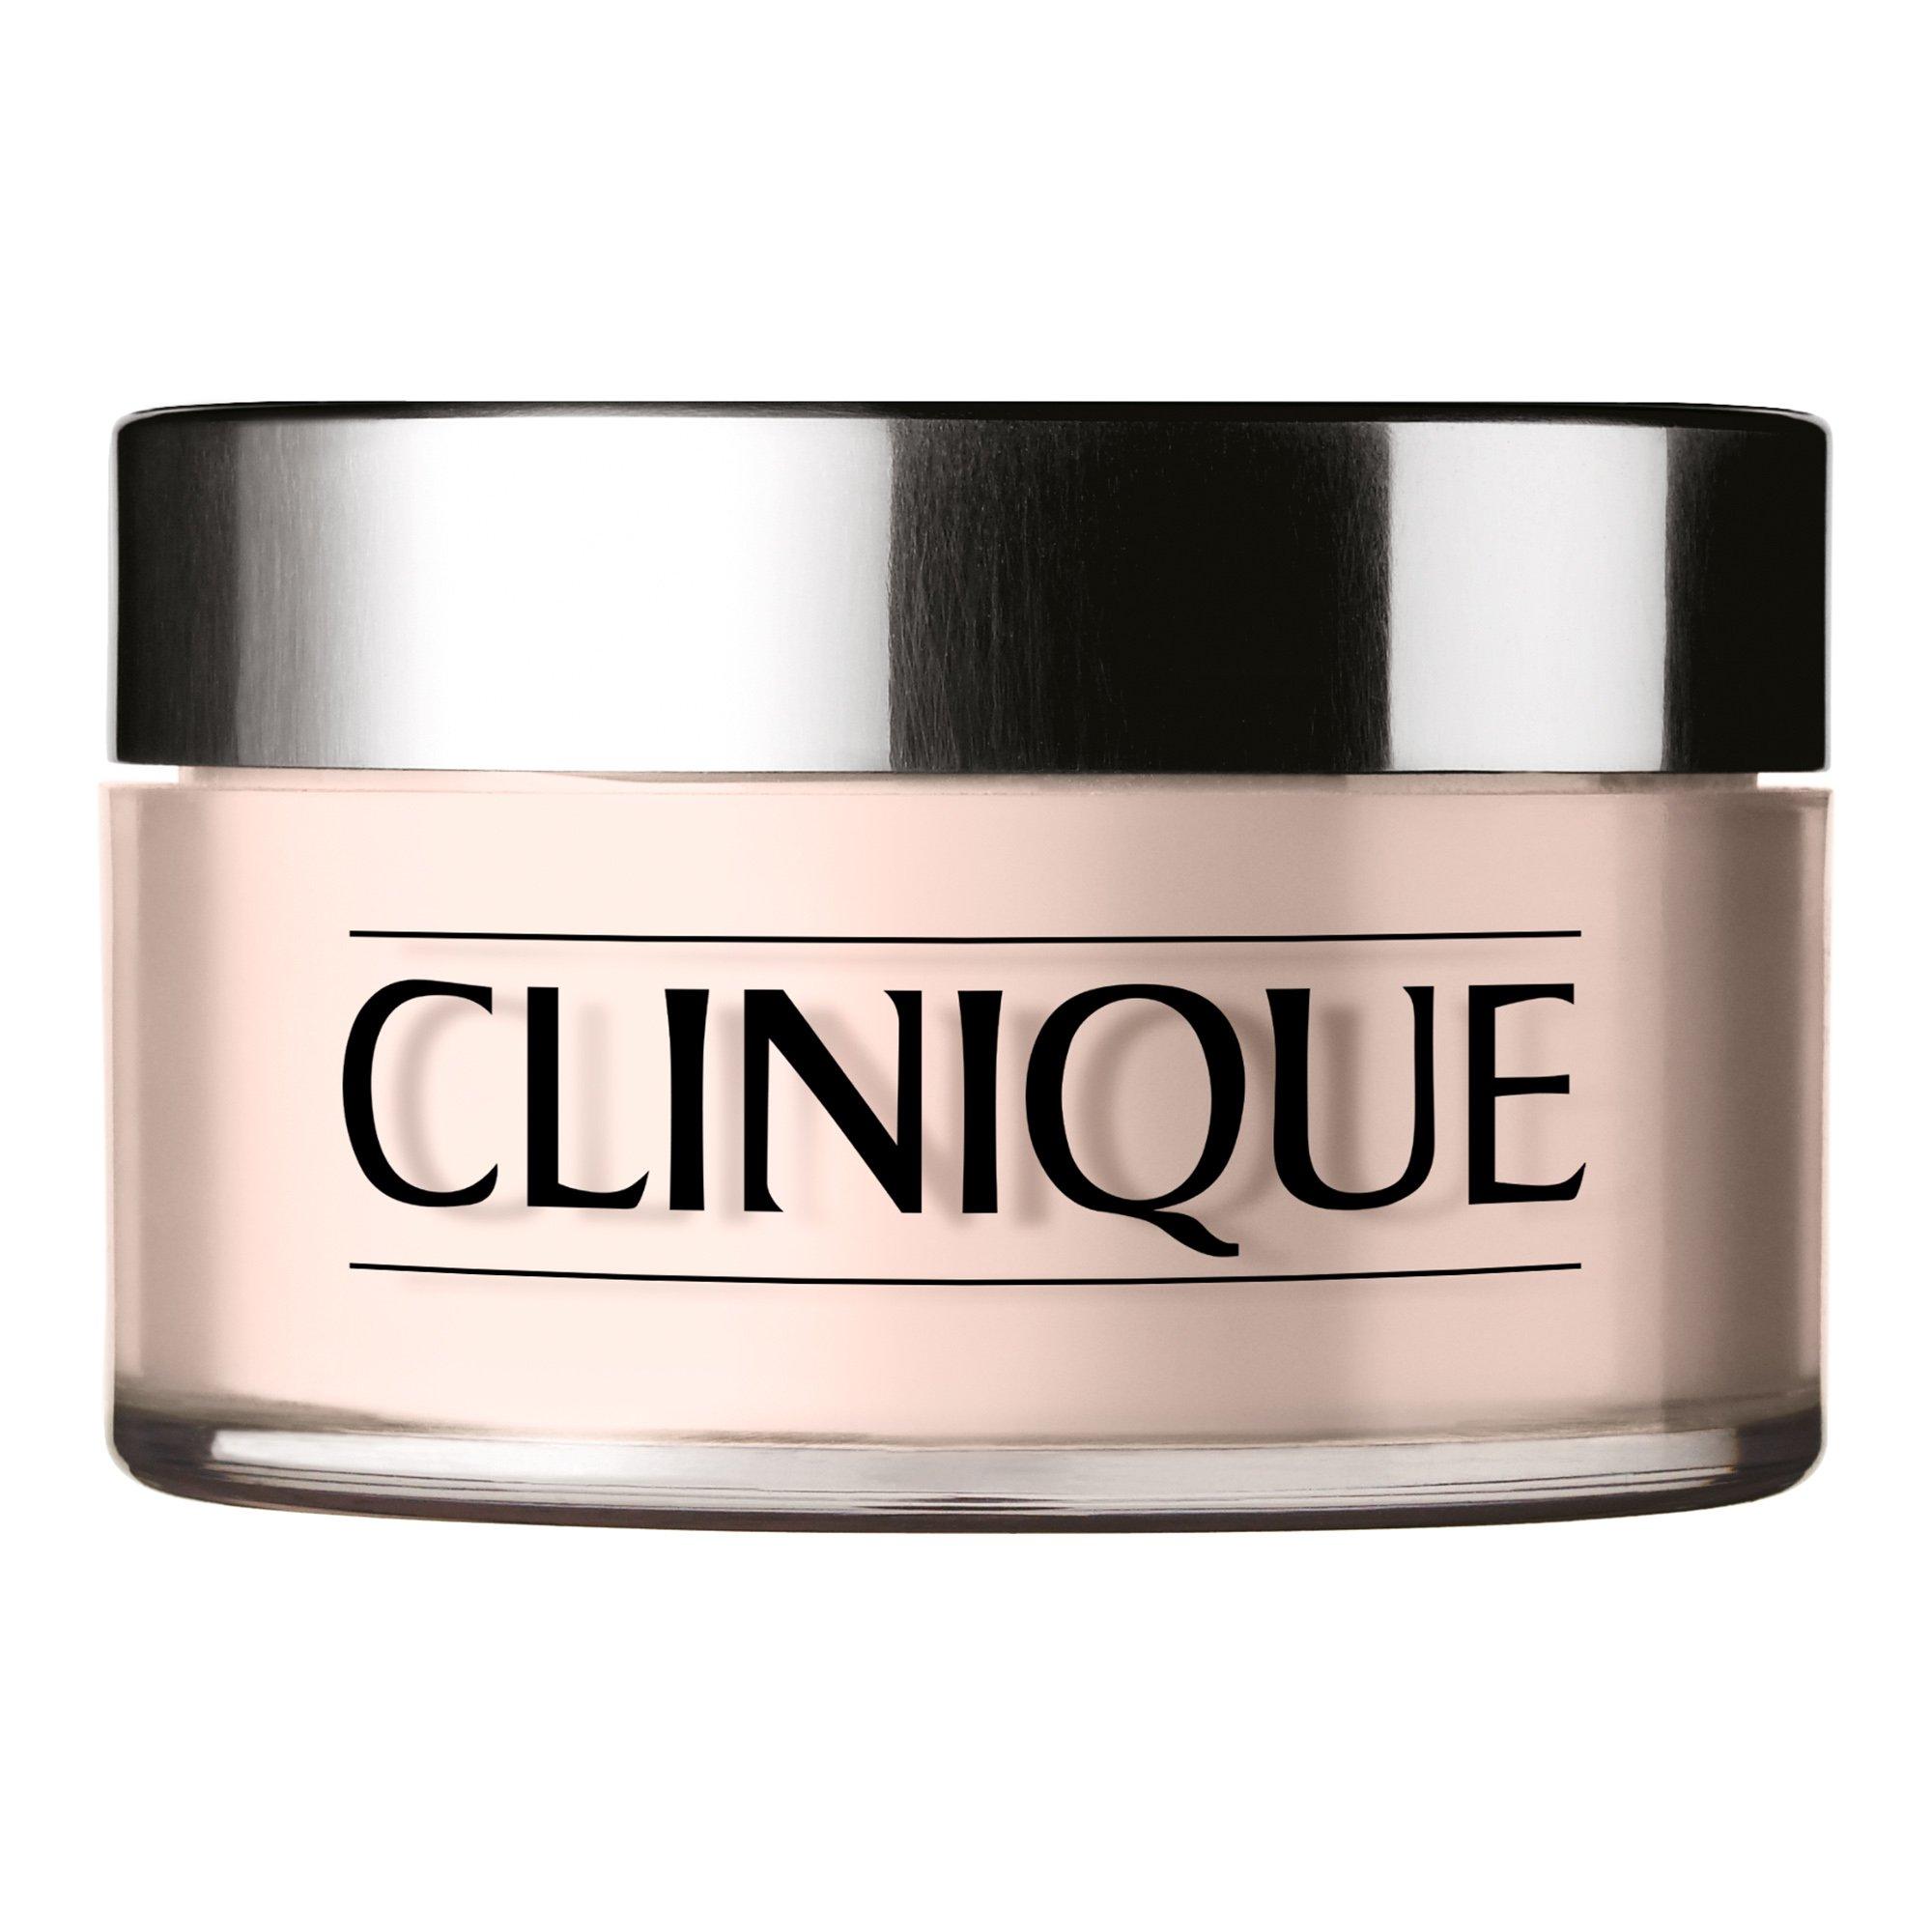 Image of CLINIQUE Blended Face Powder